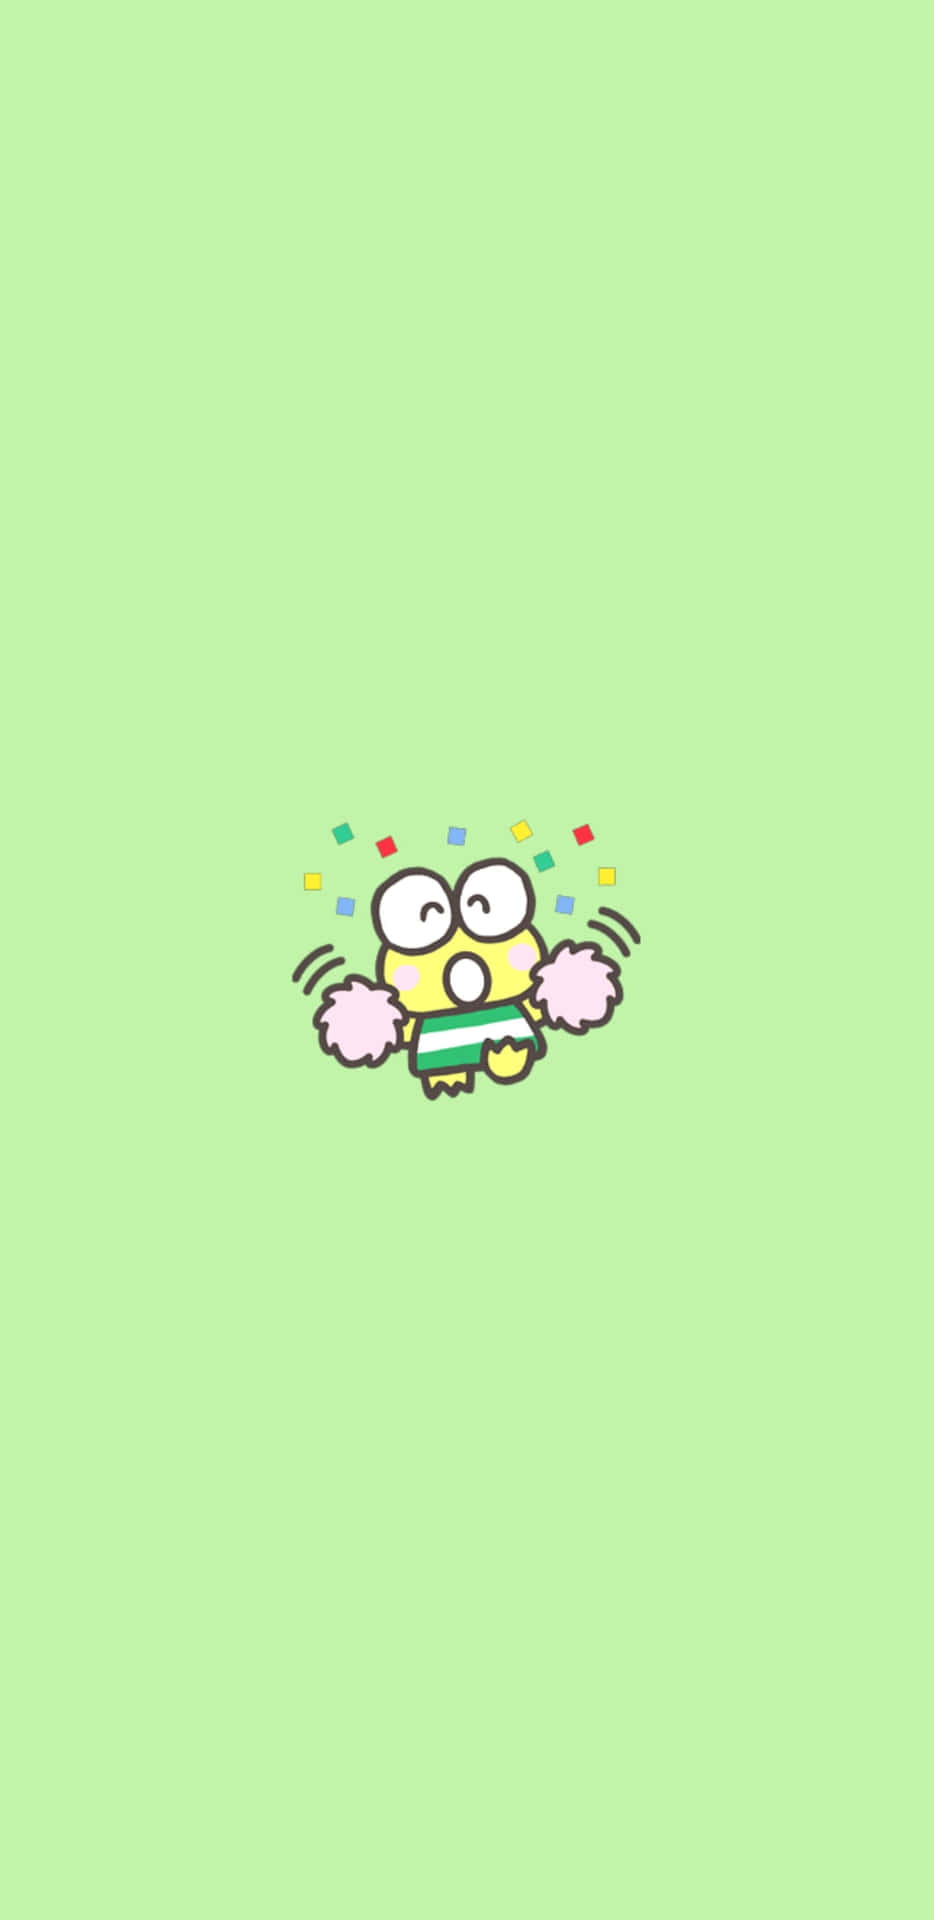 'Cuteness Overload: Look How Adorable This Green Kawaii Is!' Wallpaper